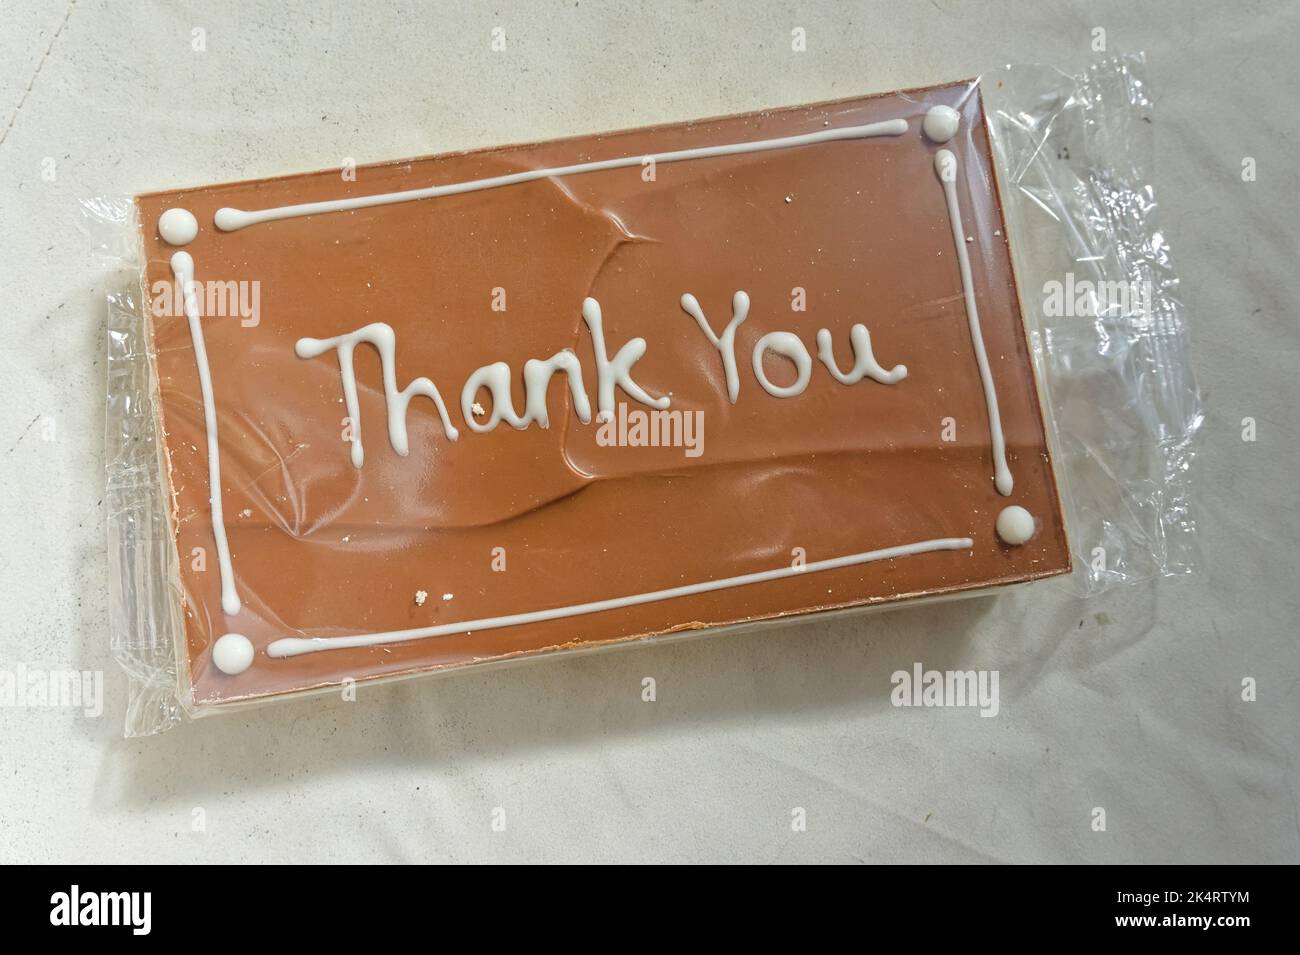 Thank You message handwritten in white on shortbread cake with toffee icing Stock Photo